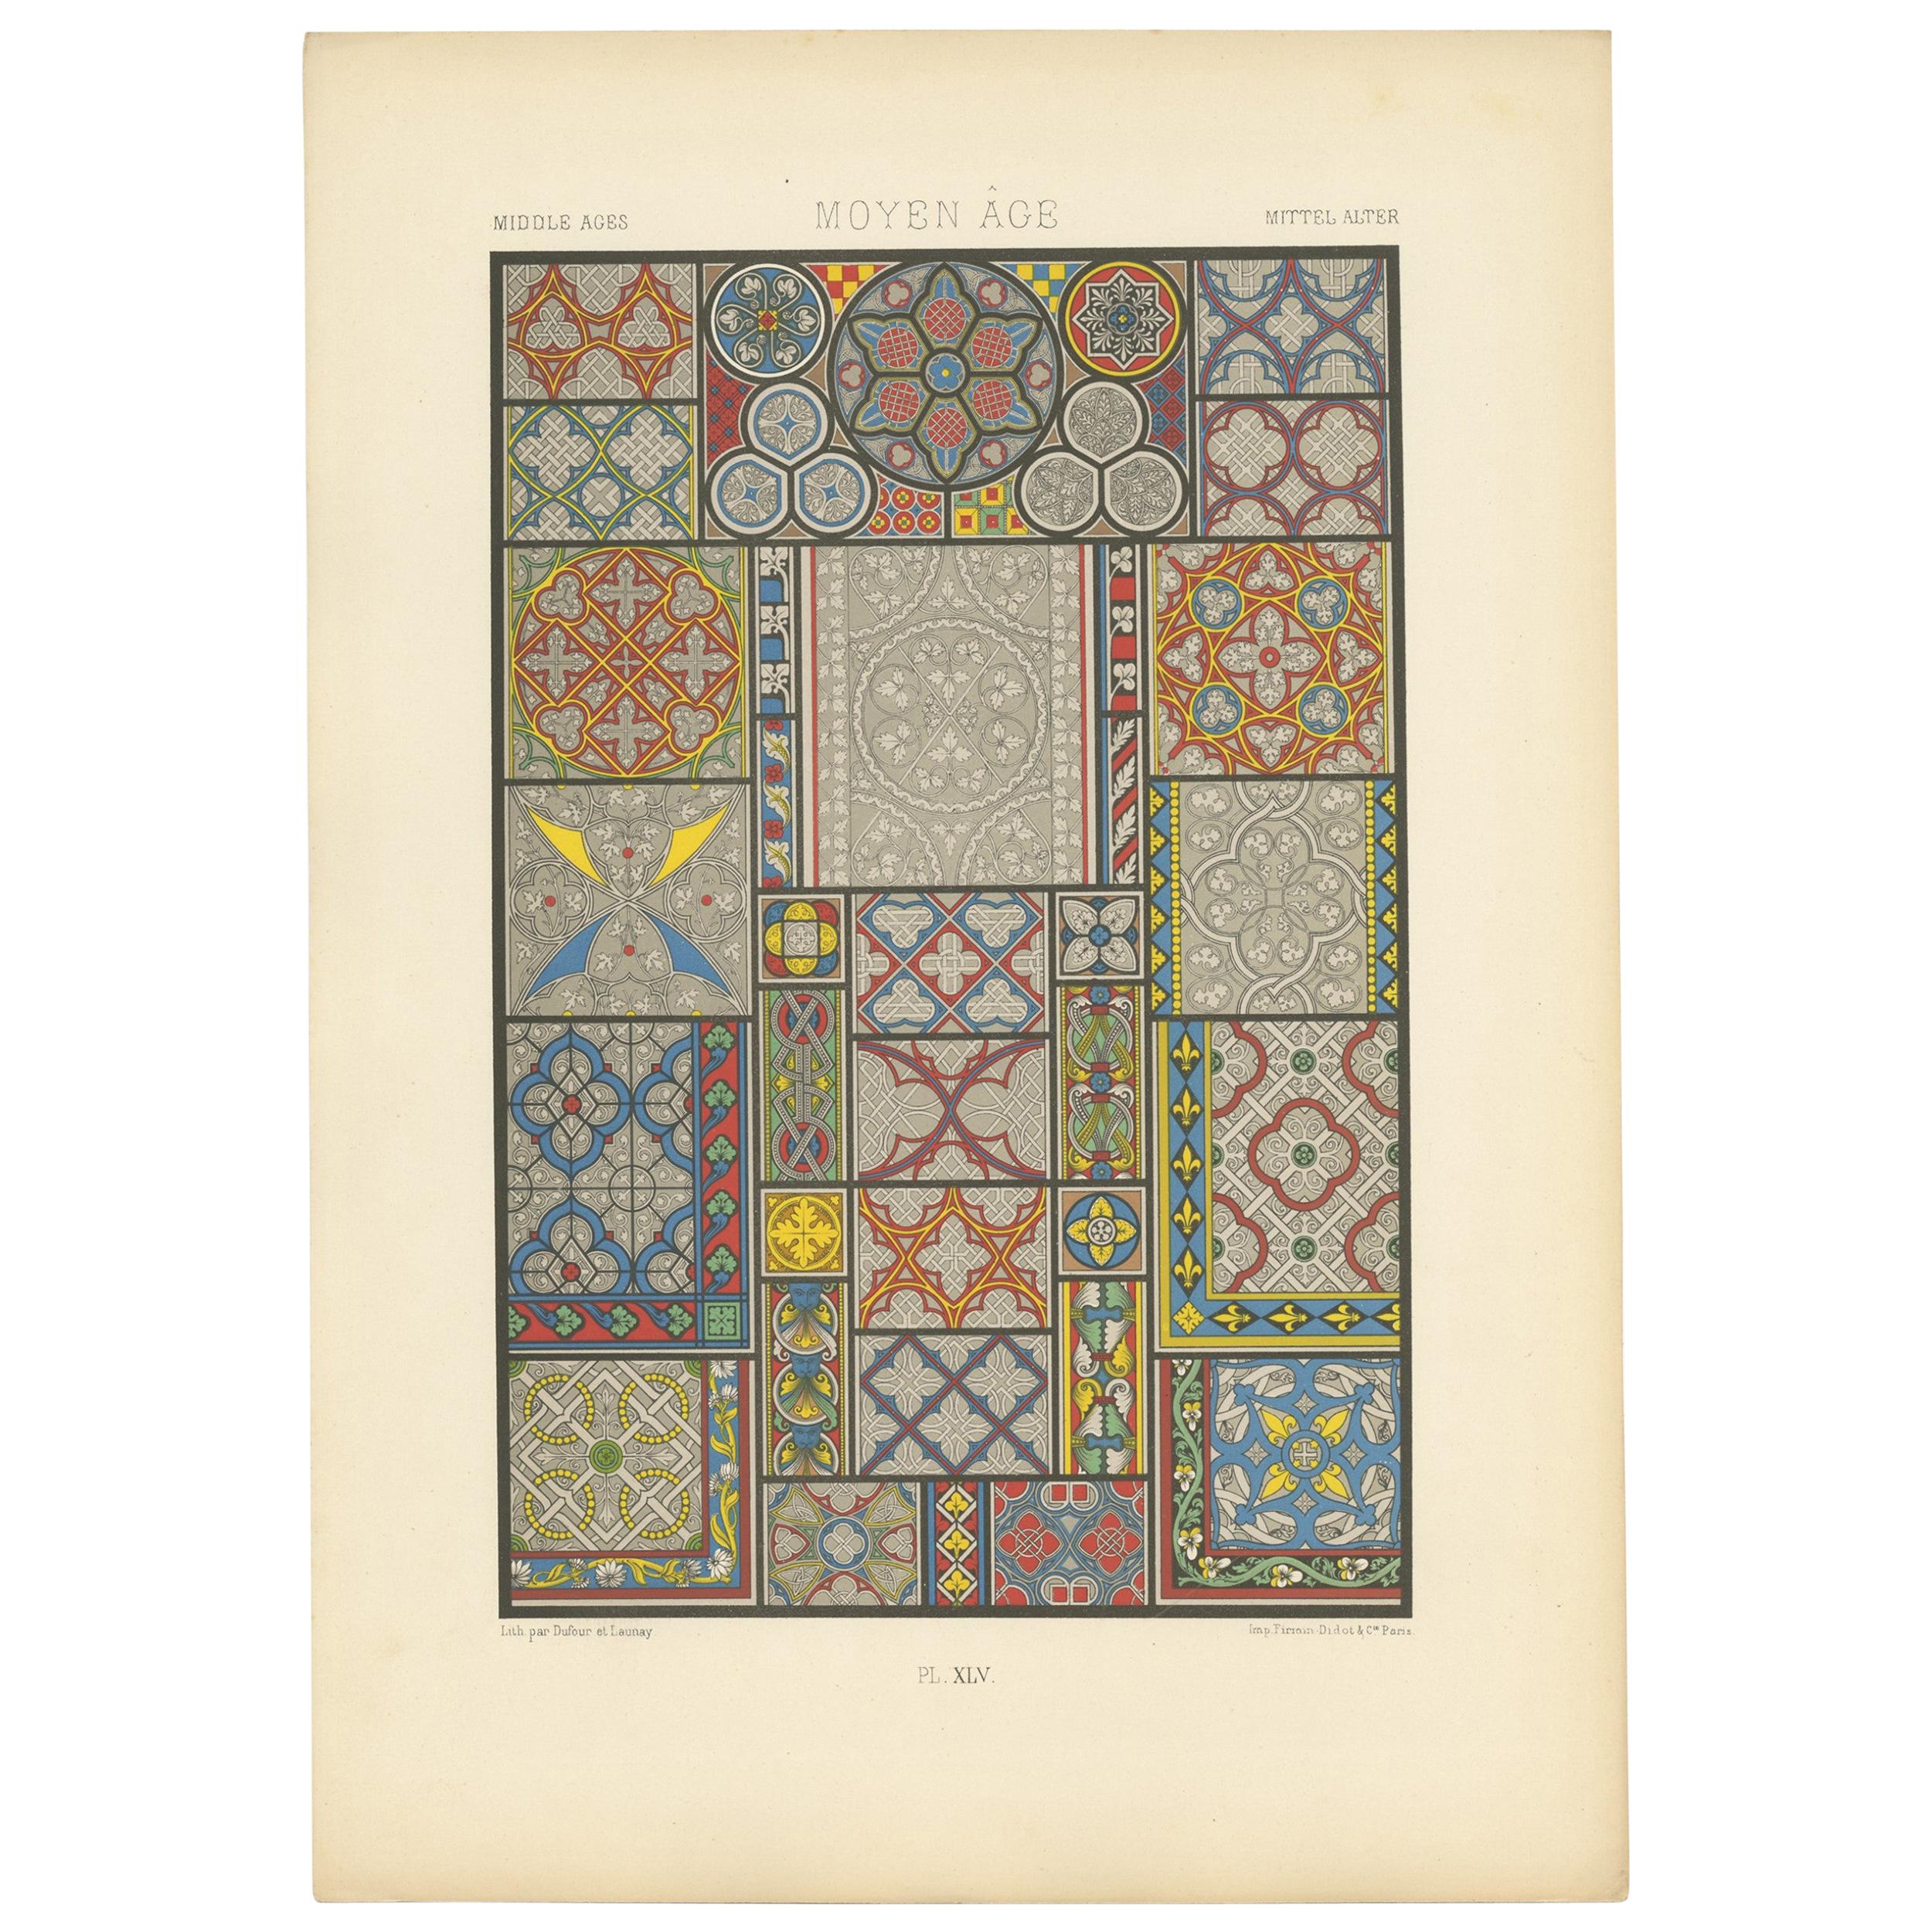 Pl. 45 Antique Print of Middle Ages Ornaments by Racinet, circa 1890